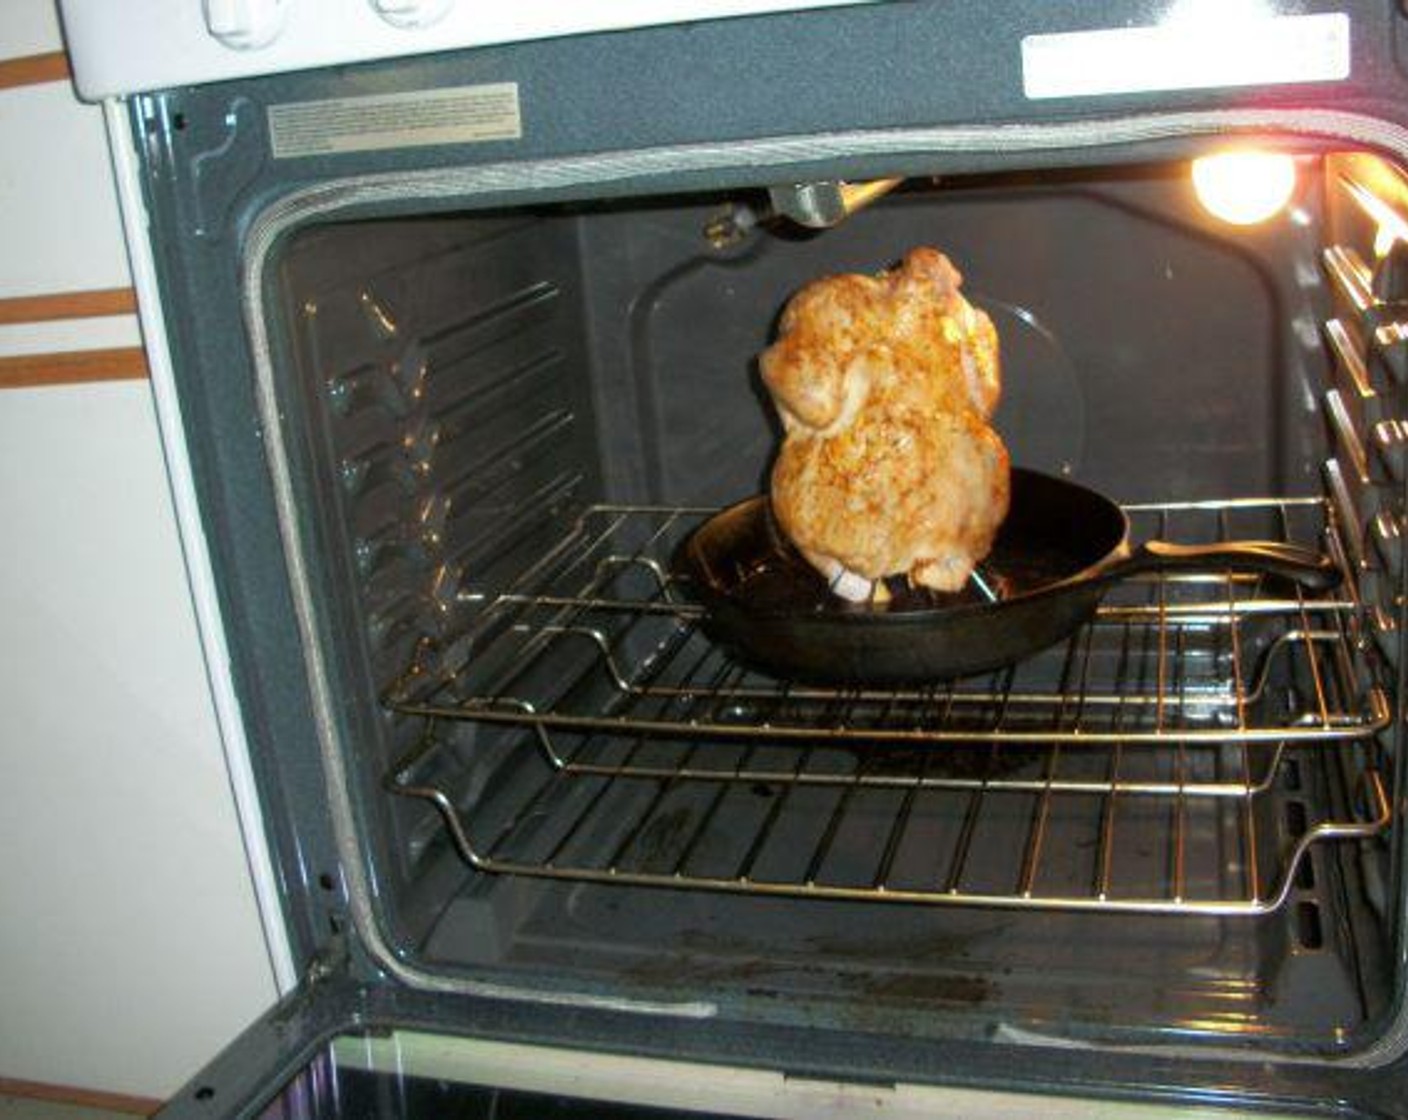 step 5 Place chicken in center of oven rack. Lower oven temperature to 425 degrees F (220 degrees C) and set timer for one hour.